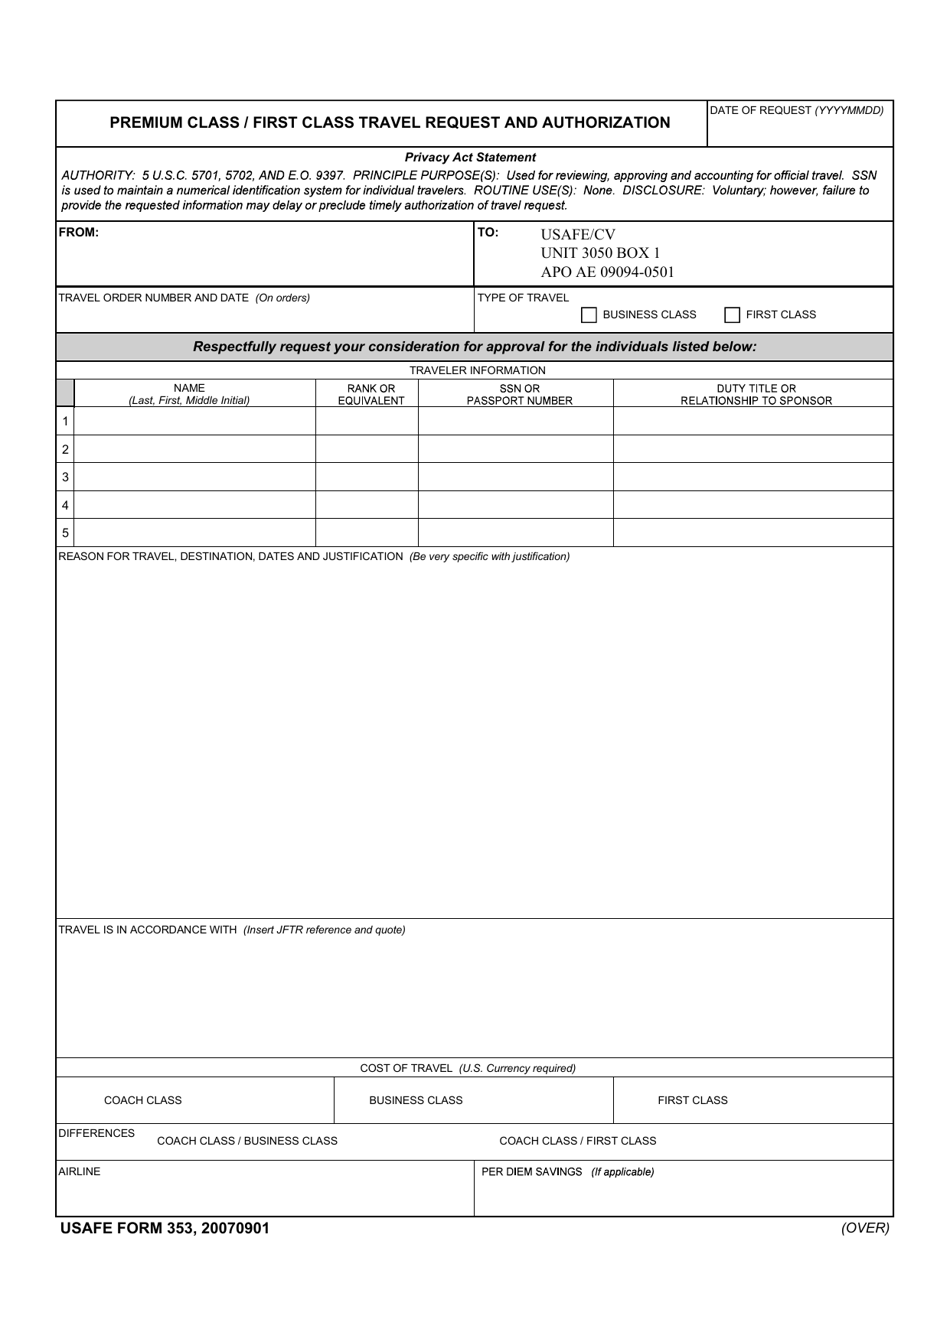 USAFE Form 353 Premium Class / First Class Travel Request and Authorization, Page 1